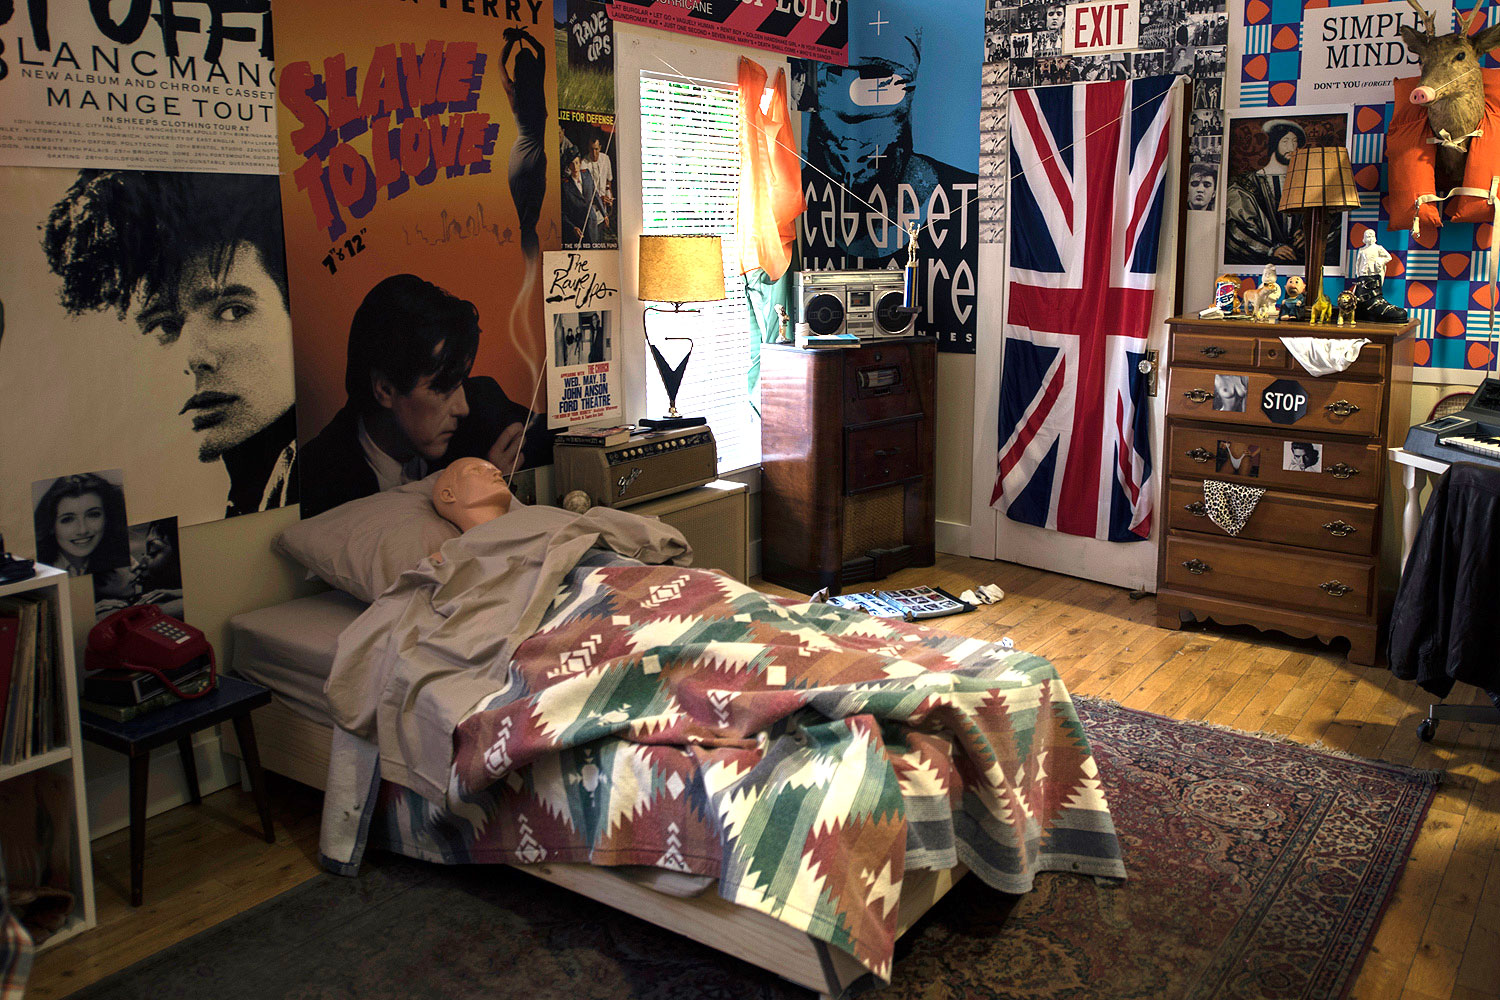 Two Artists Recreated Ferris Bueller’s Bedroom—and It Is Amazing